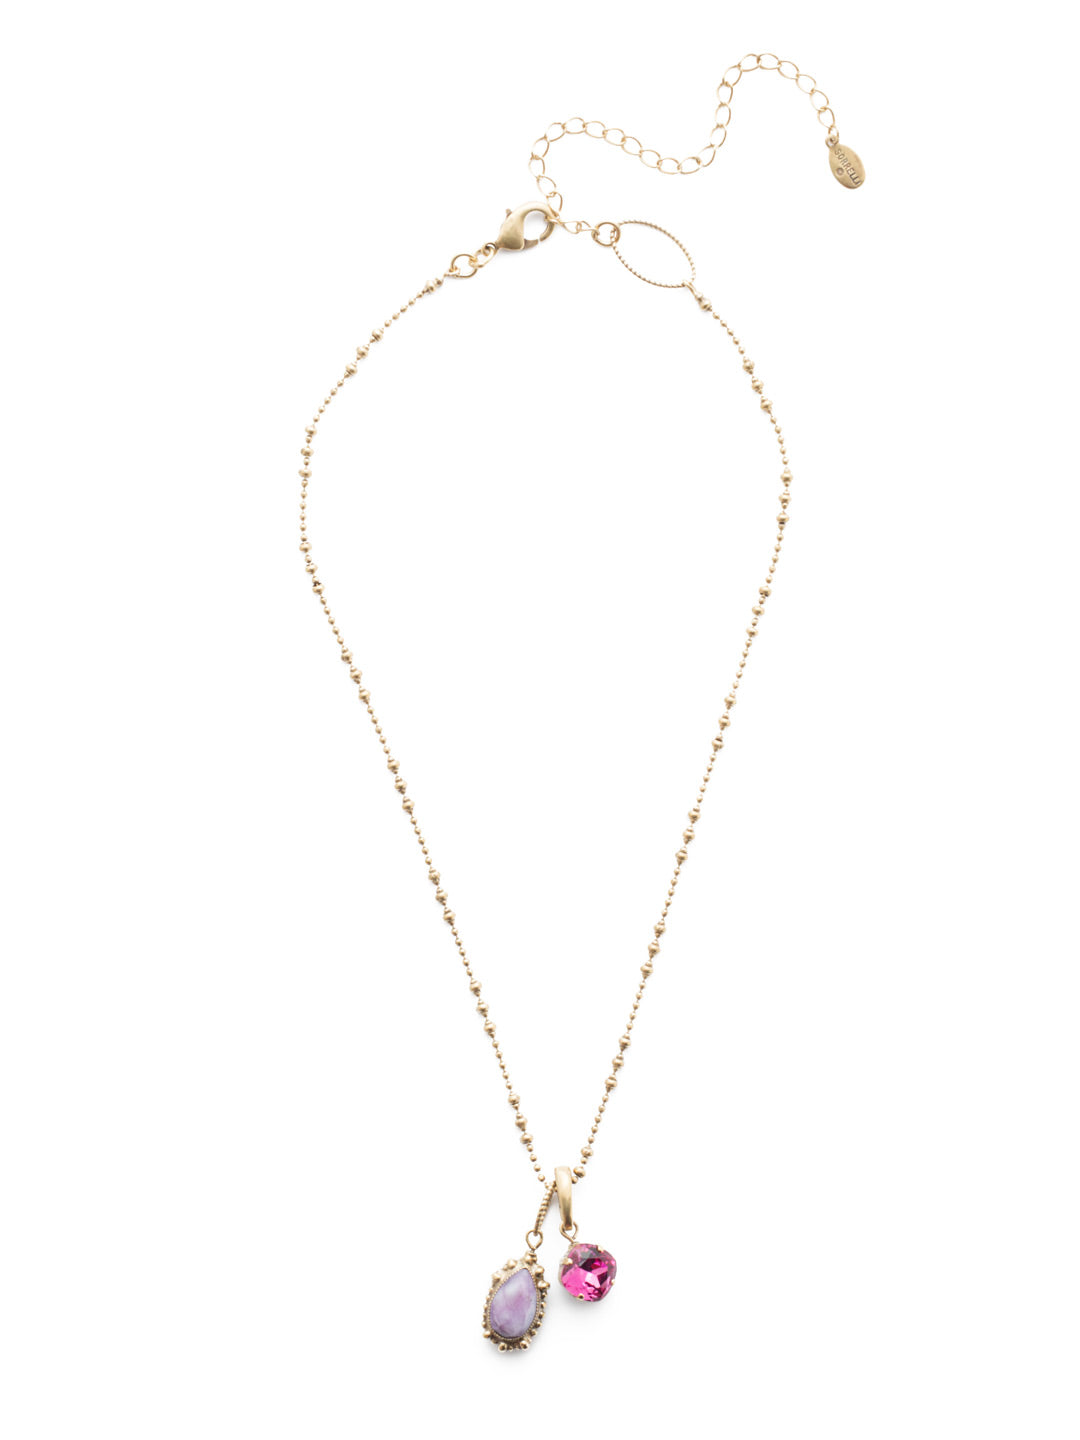 Henrietta Pendant Necklace - NEU15AGDCS - <p>Fasten on the Henrietta Pendant Necklace for a touch of everything there is to love about Sorrelli style: sparkling crystal, unique stonework and delicate metalwork. From Sorrelli's Duchess collection in our Antique Gold-tone finish.</p>